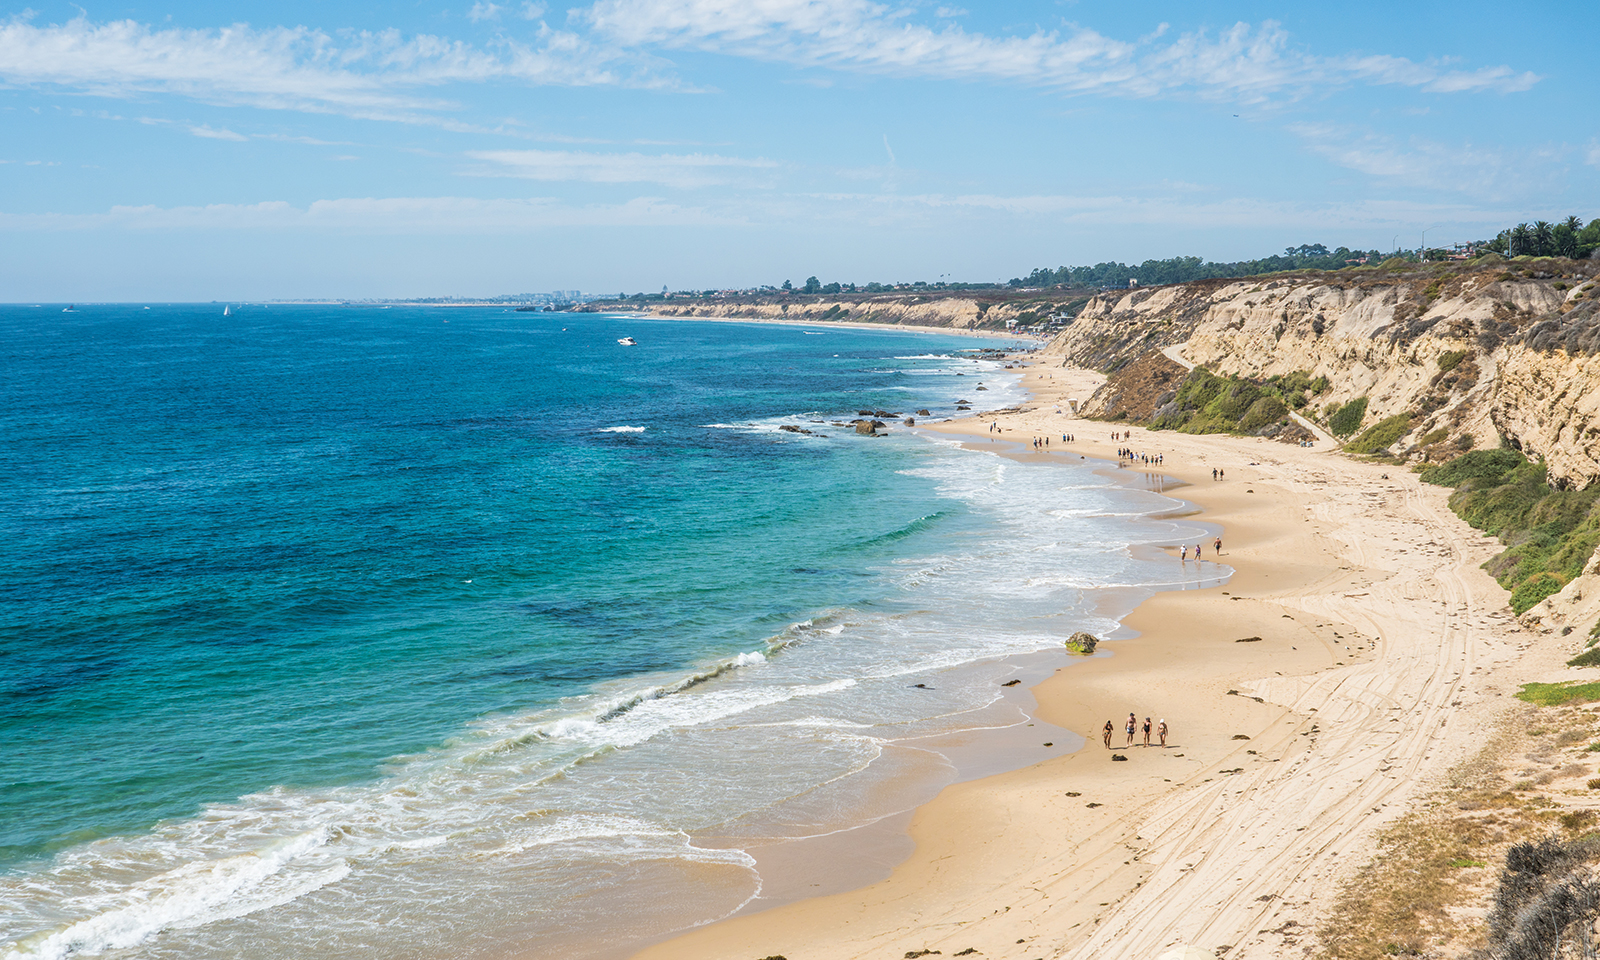 Discover Crystal Cove in a new way